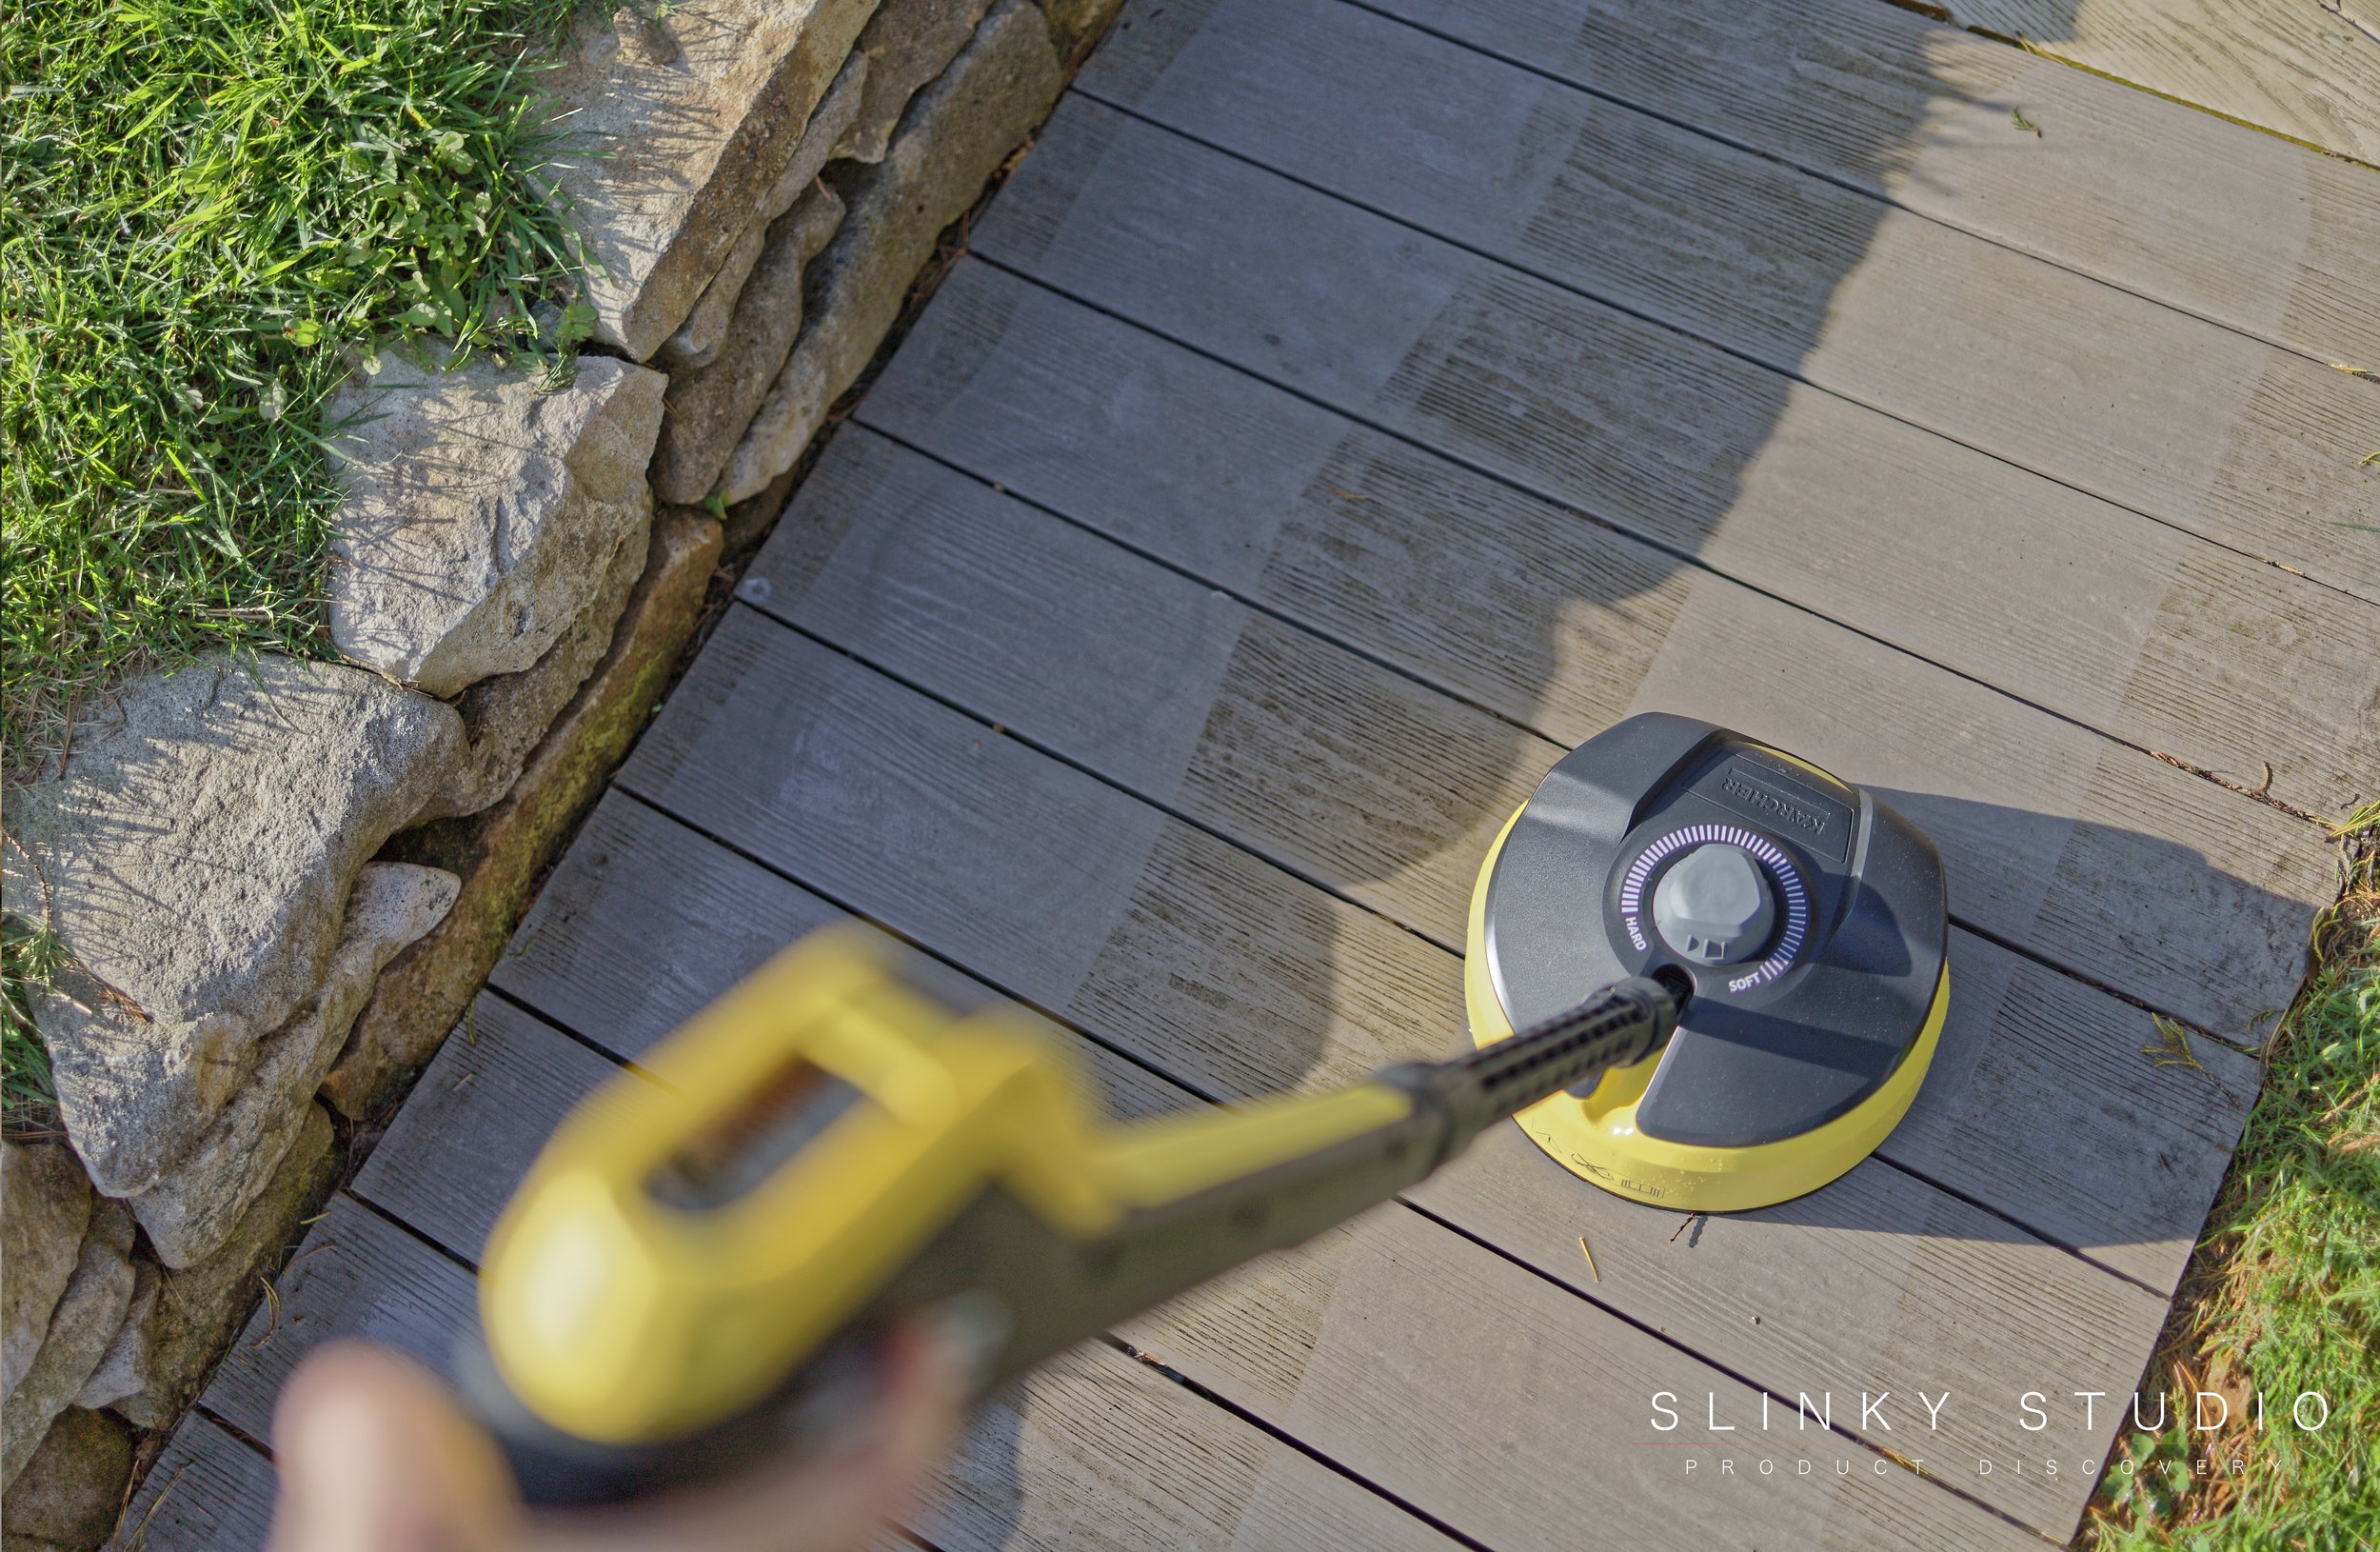 Karcher K4 Pressure Washer Review review - Motor Boat & Yachting